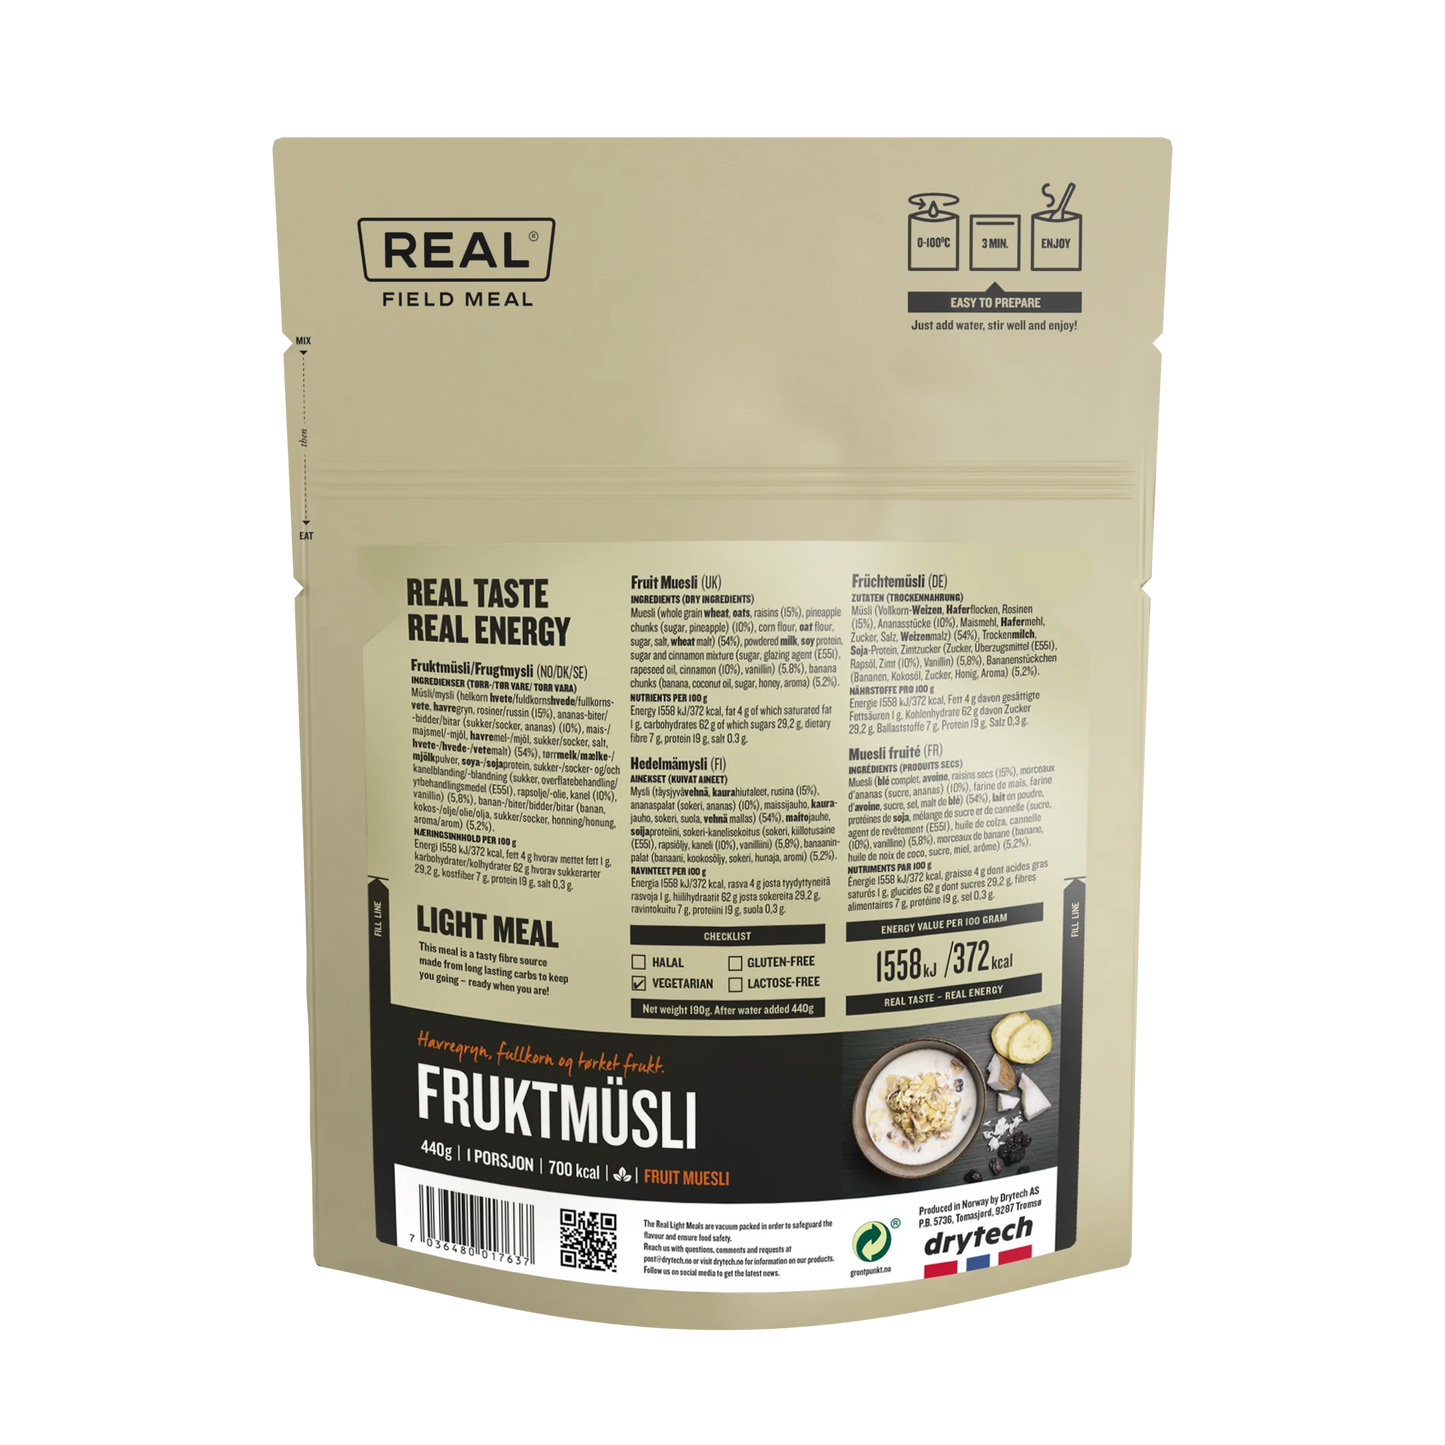 Real Field Meal - Fruit Muesli (700kcal) Pouches - BULK BUY